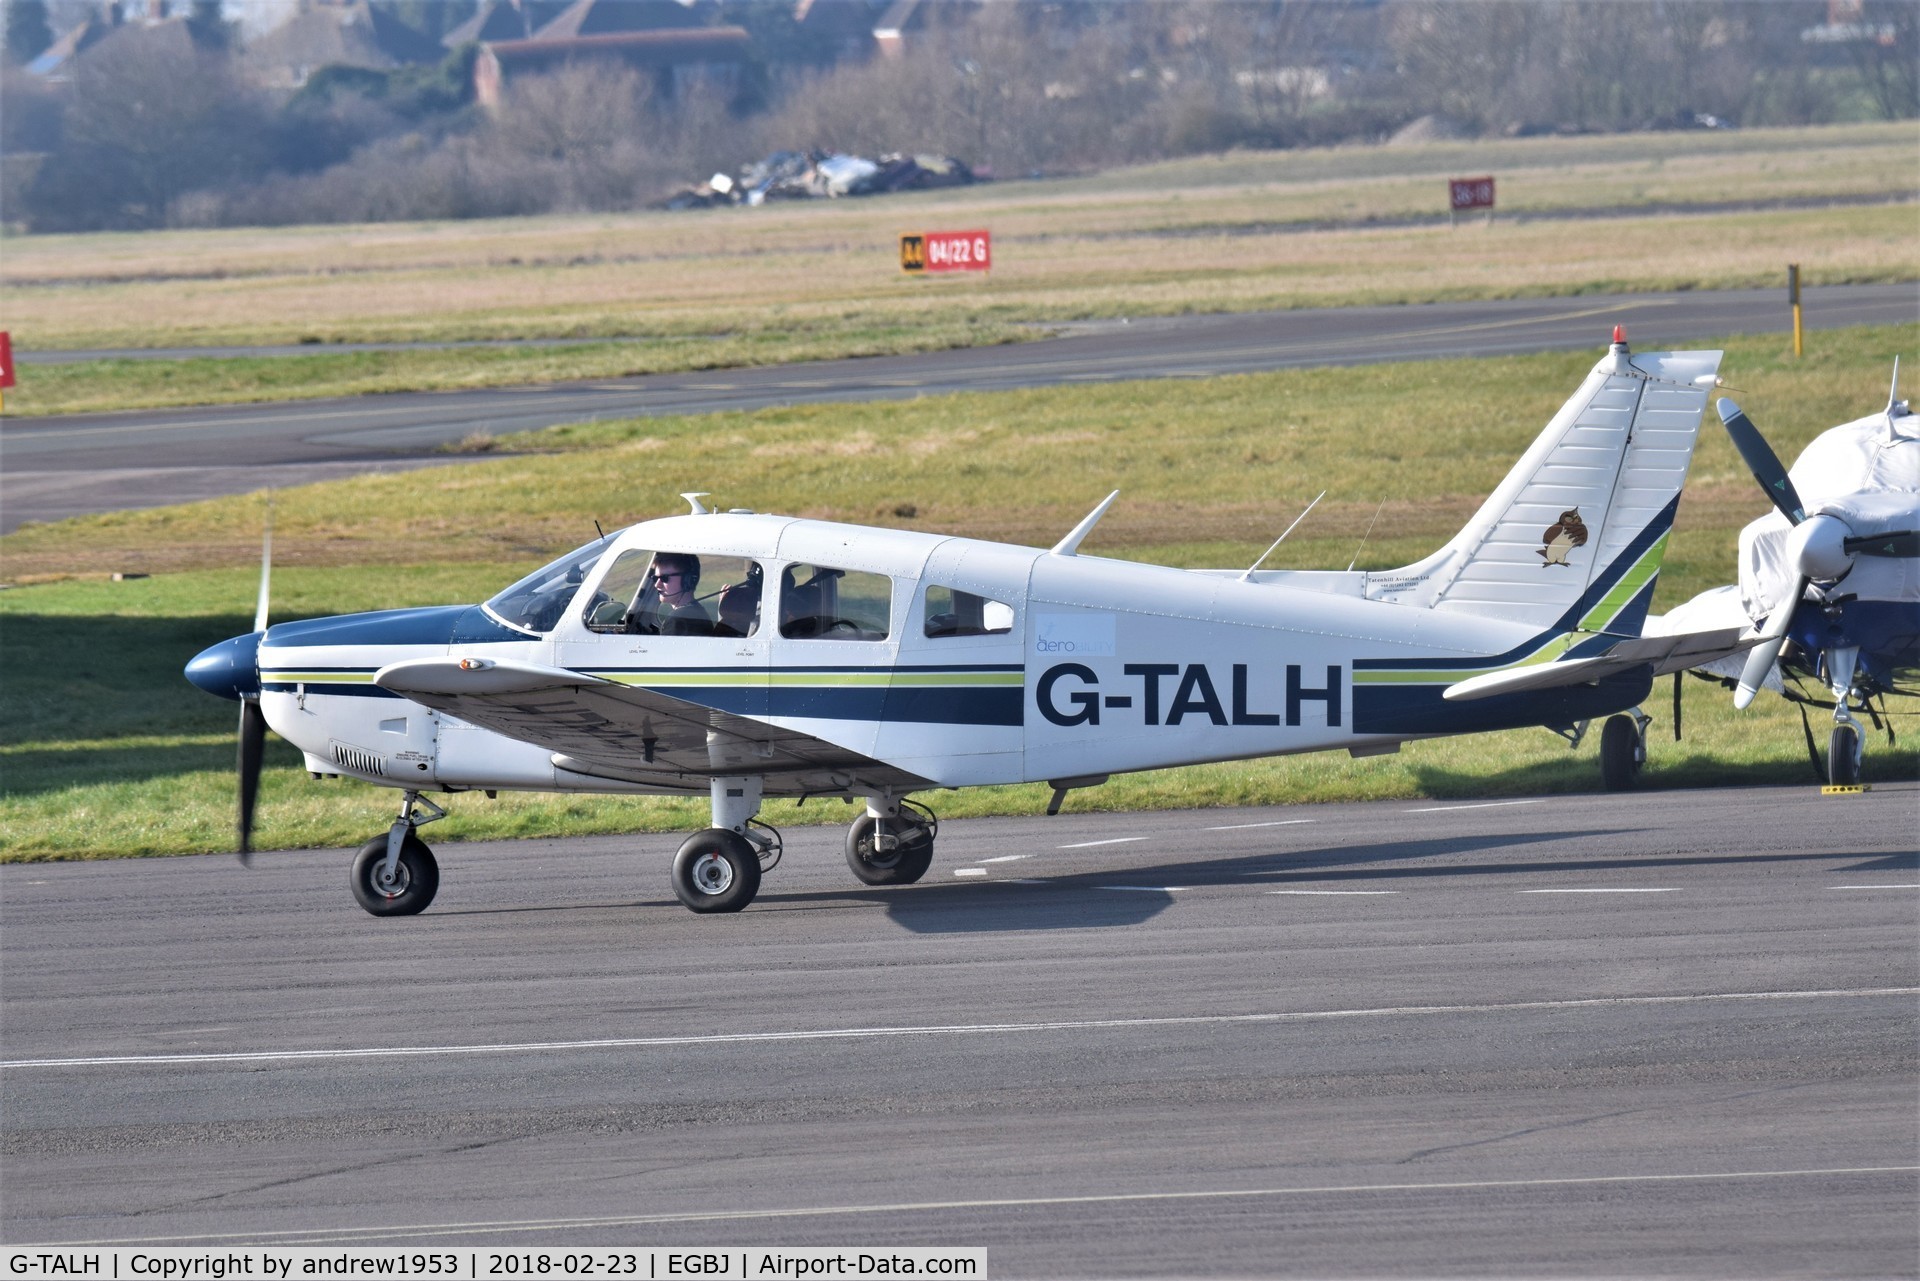 G-TALH, 1976 Piper PA-28-181 Cherokee Archer II C/N 28-7790208, G-TALH at Gloucestershire Airport.